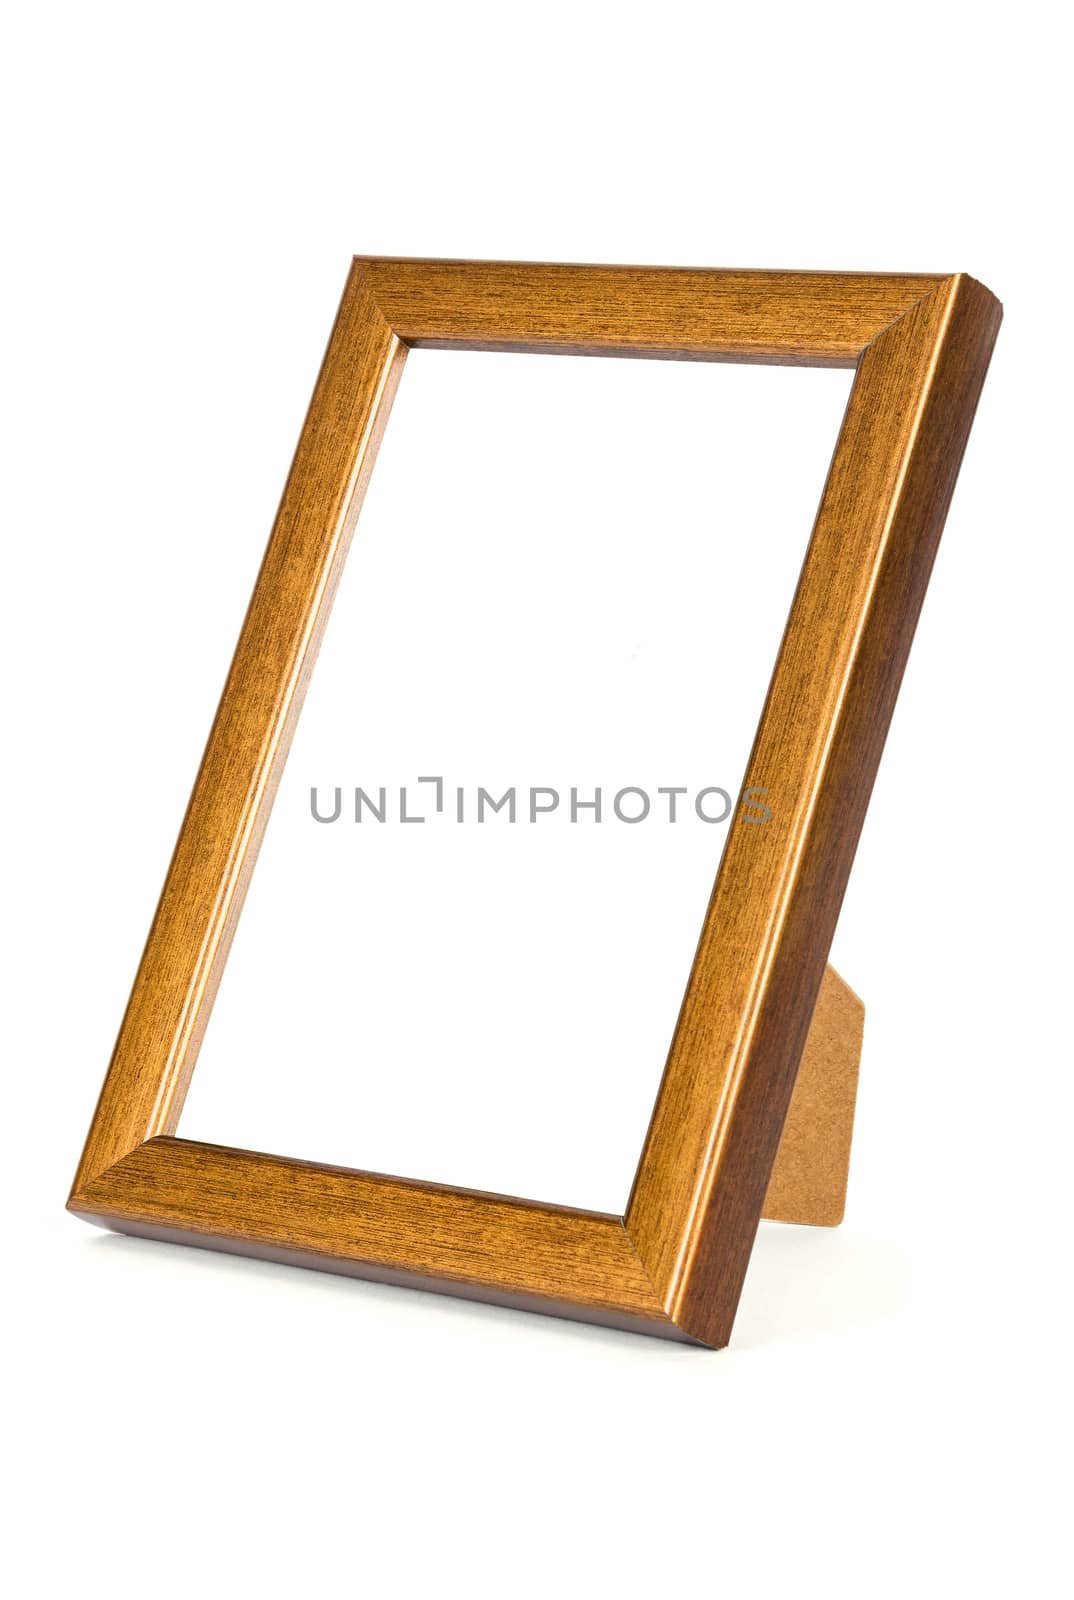 Copper photo frame on white background by mkos83